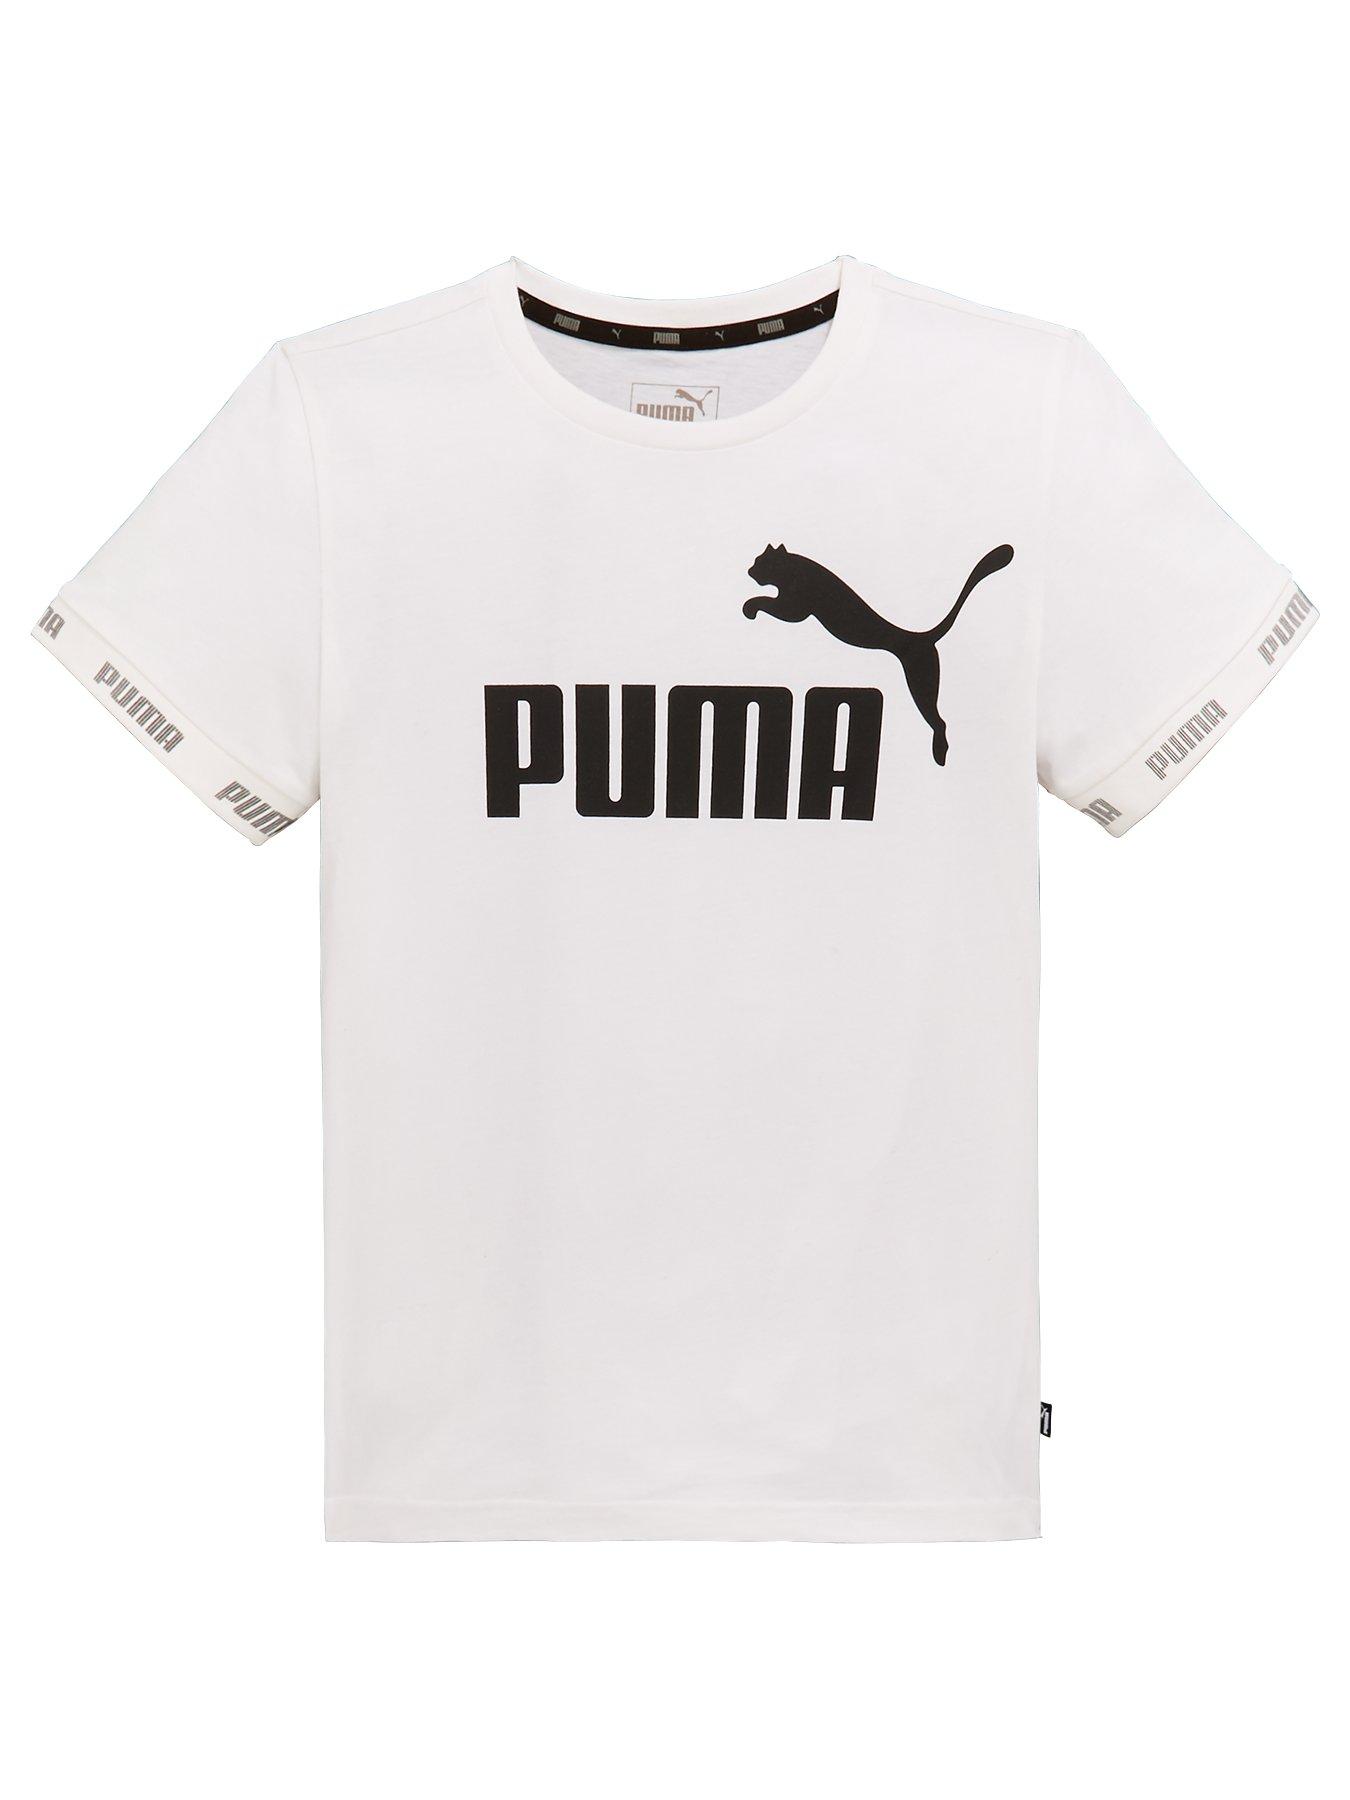 Puma Older Boys Short Sleeve Amplified T Shirt White - new way 922 womens v neck t shirt roblox logo game filled small white